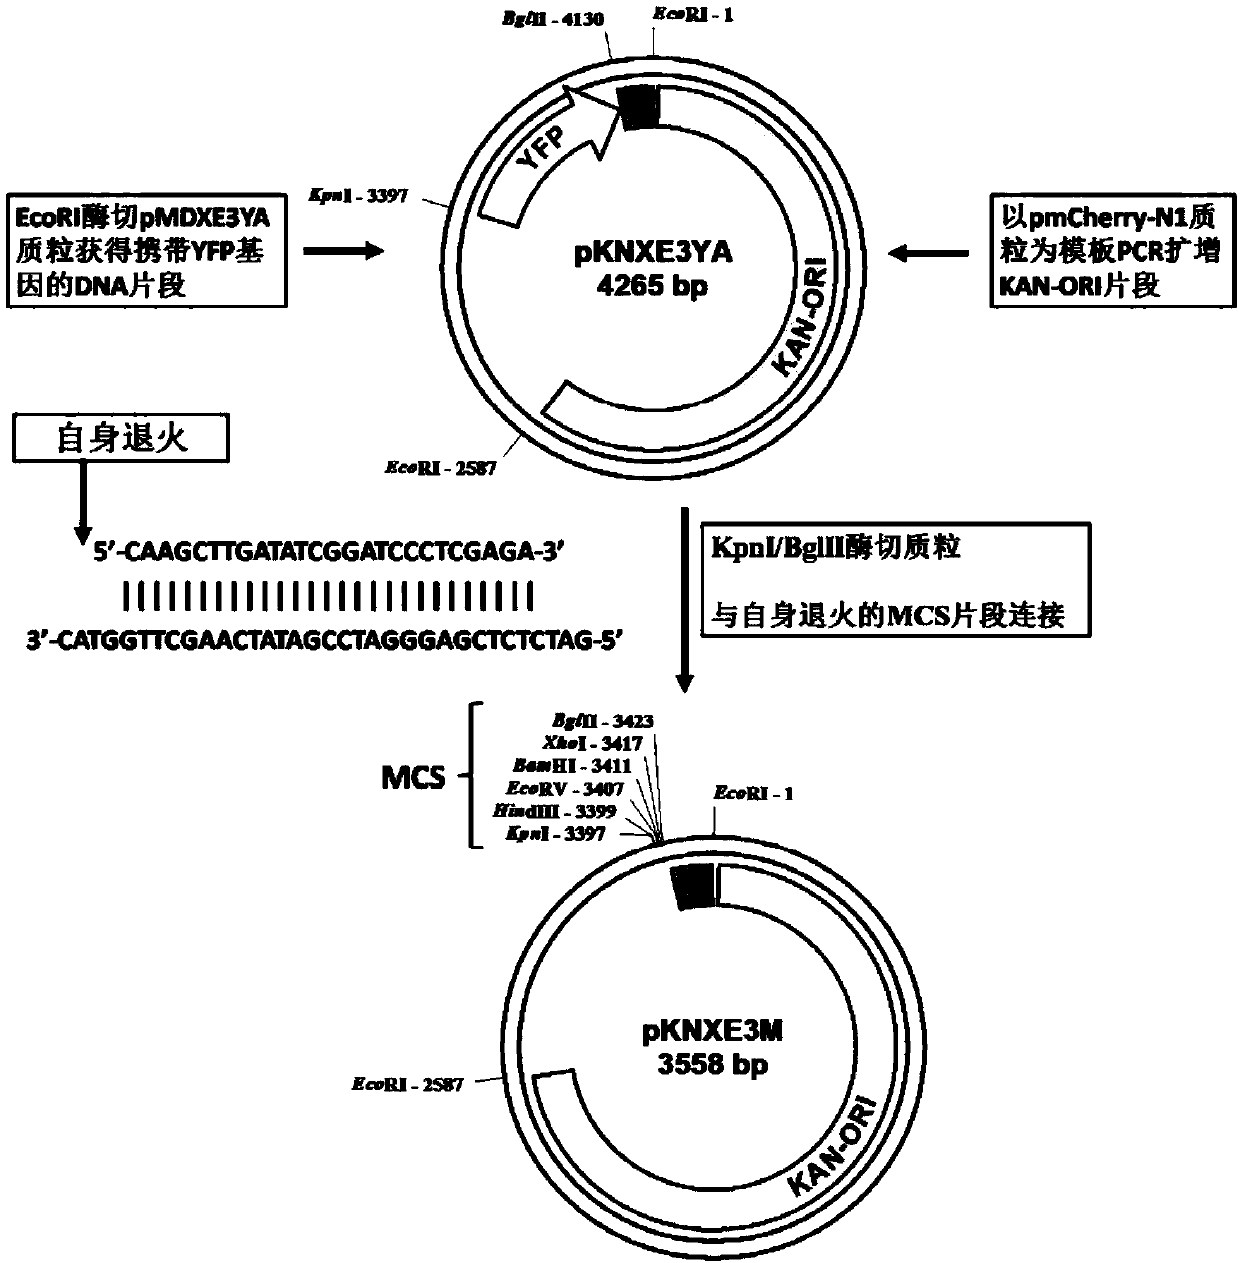 Replicating type recombinant adenovirus HAdV-5 carrier system and application thereof